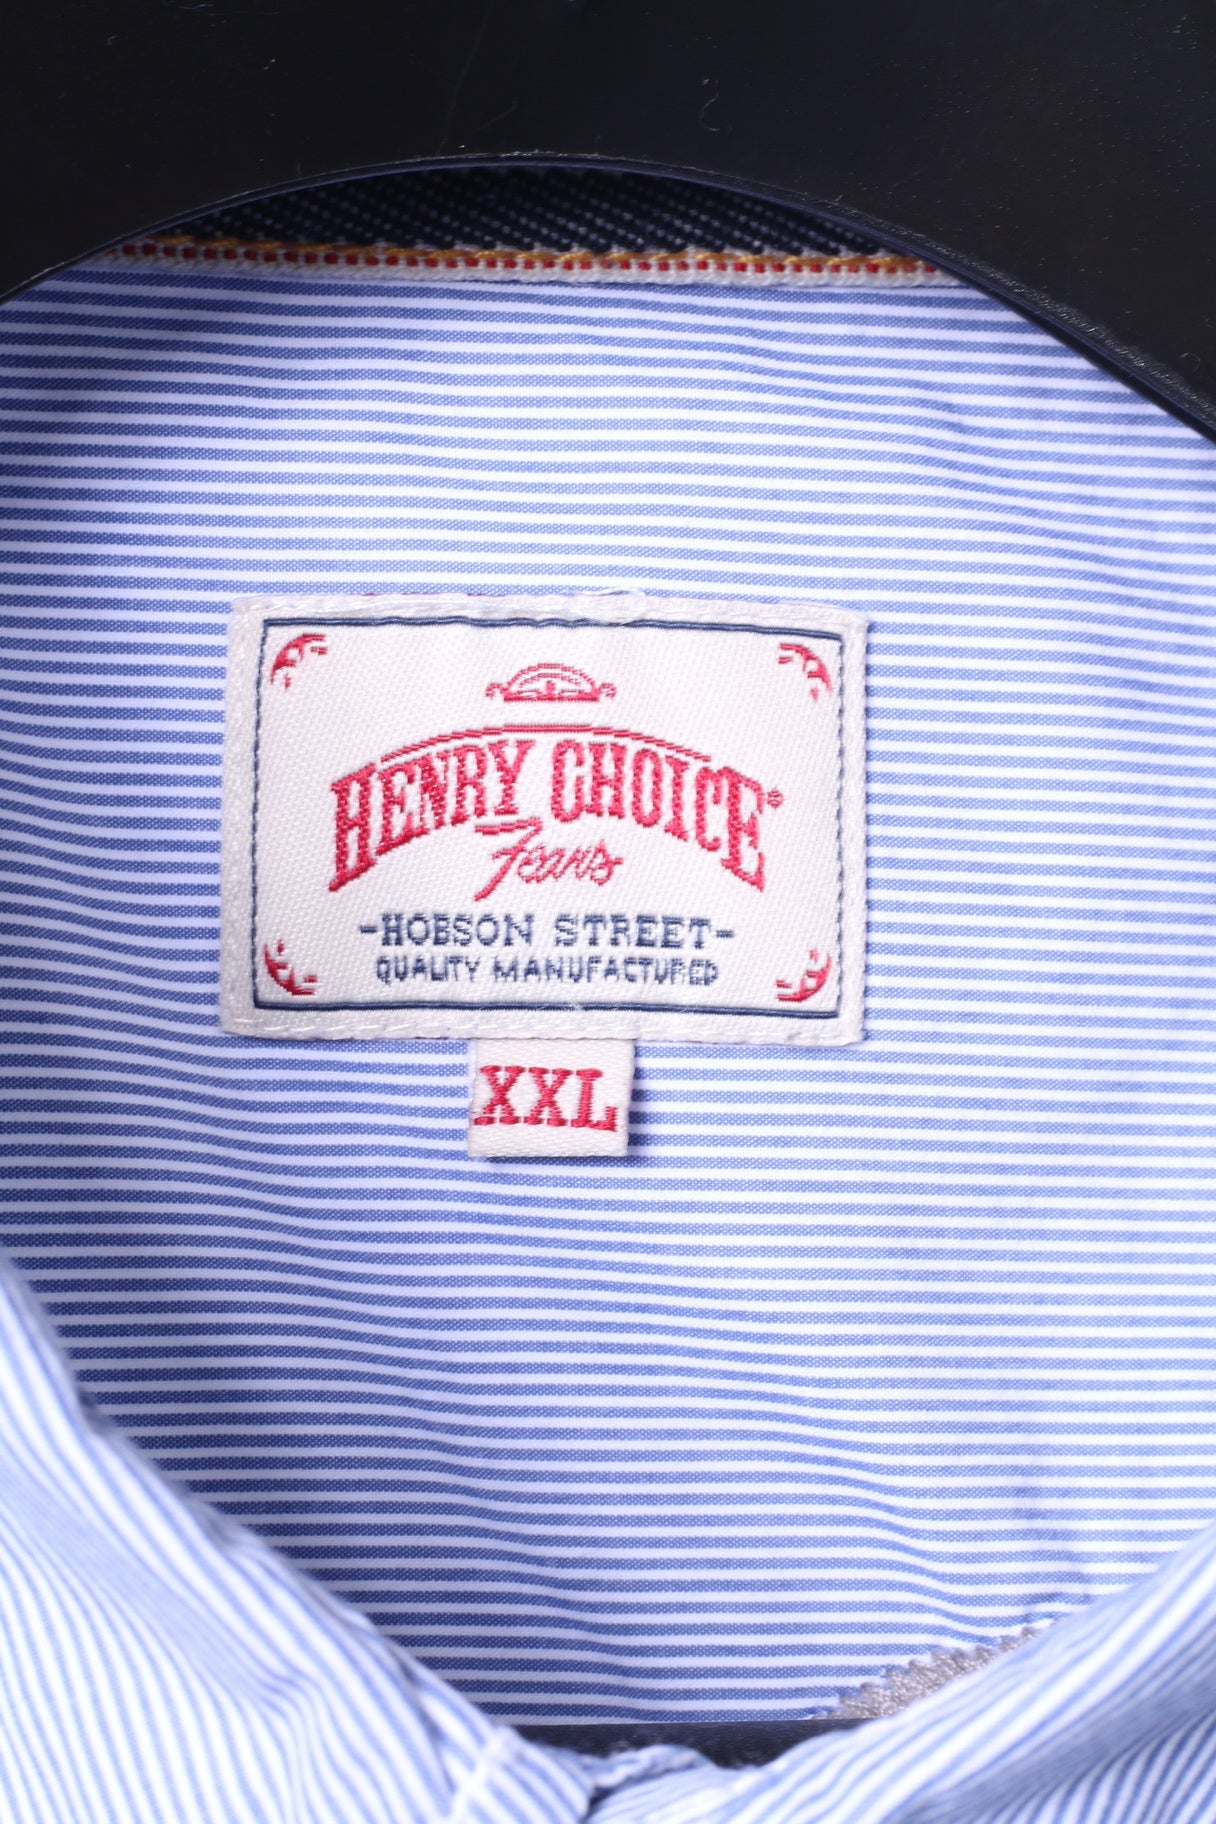 Henry Choice Jeans Mens XXL Casual Shirt Blue Striped Embroidered Long Sleeve